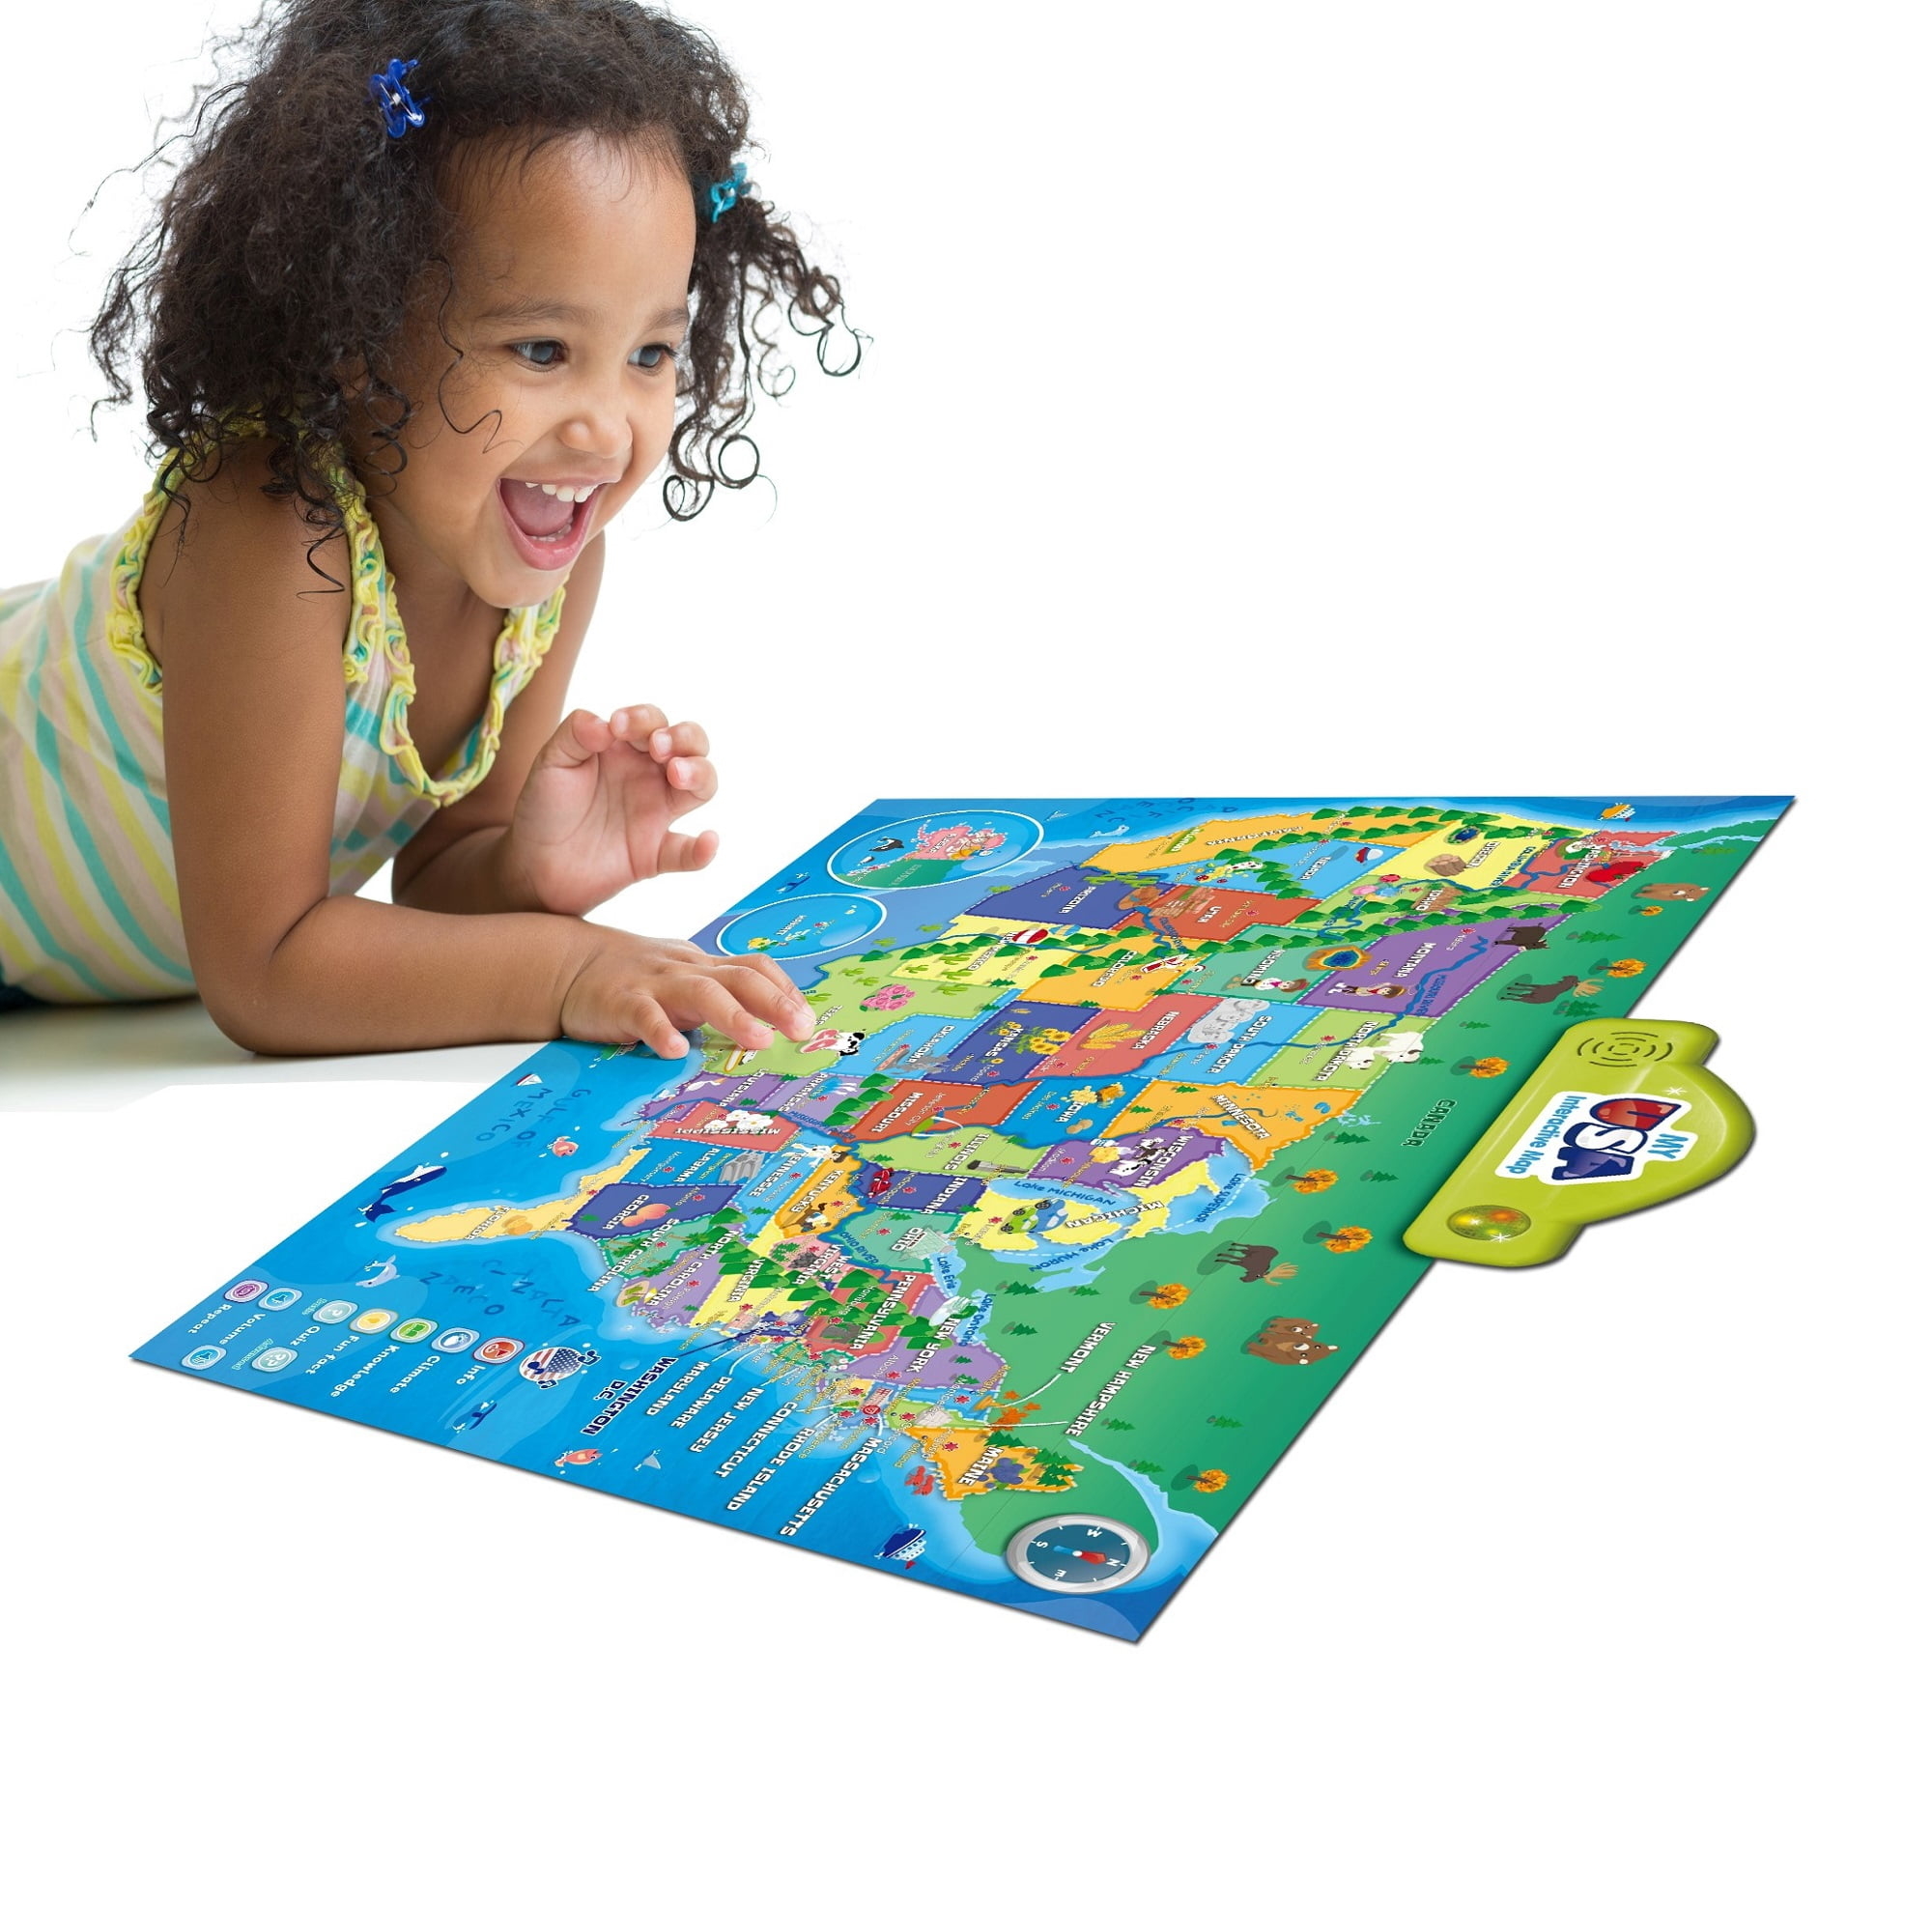 kid playing with talking map on the floor